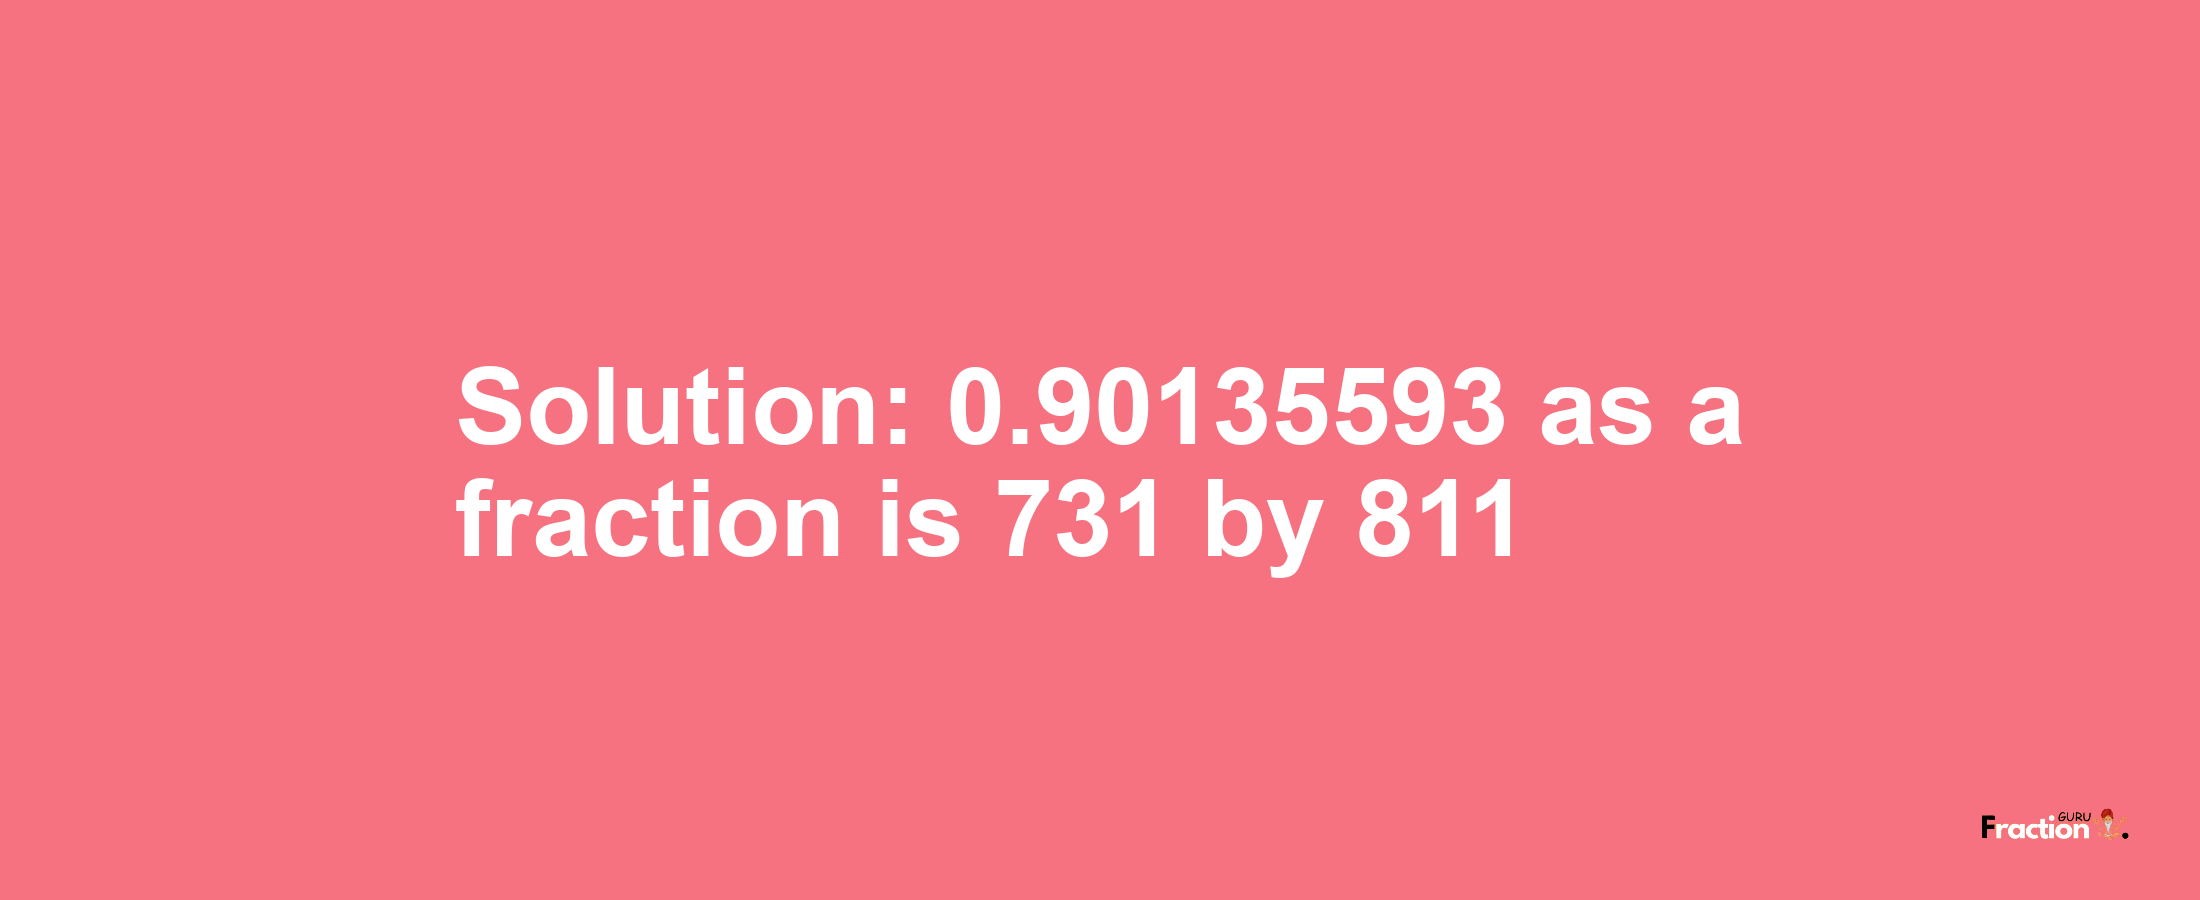 Solution:0.90135593 as a fraction is 731/811